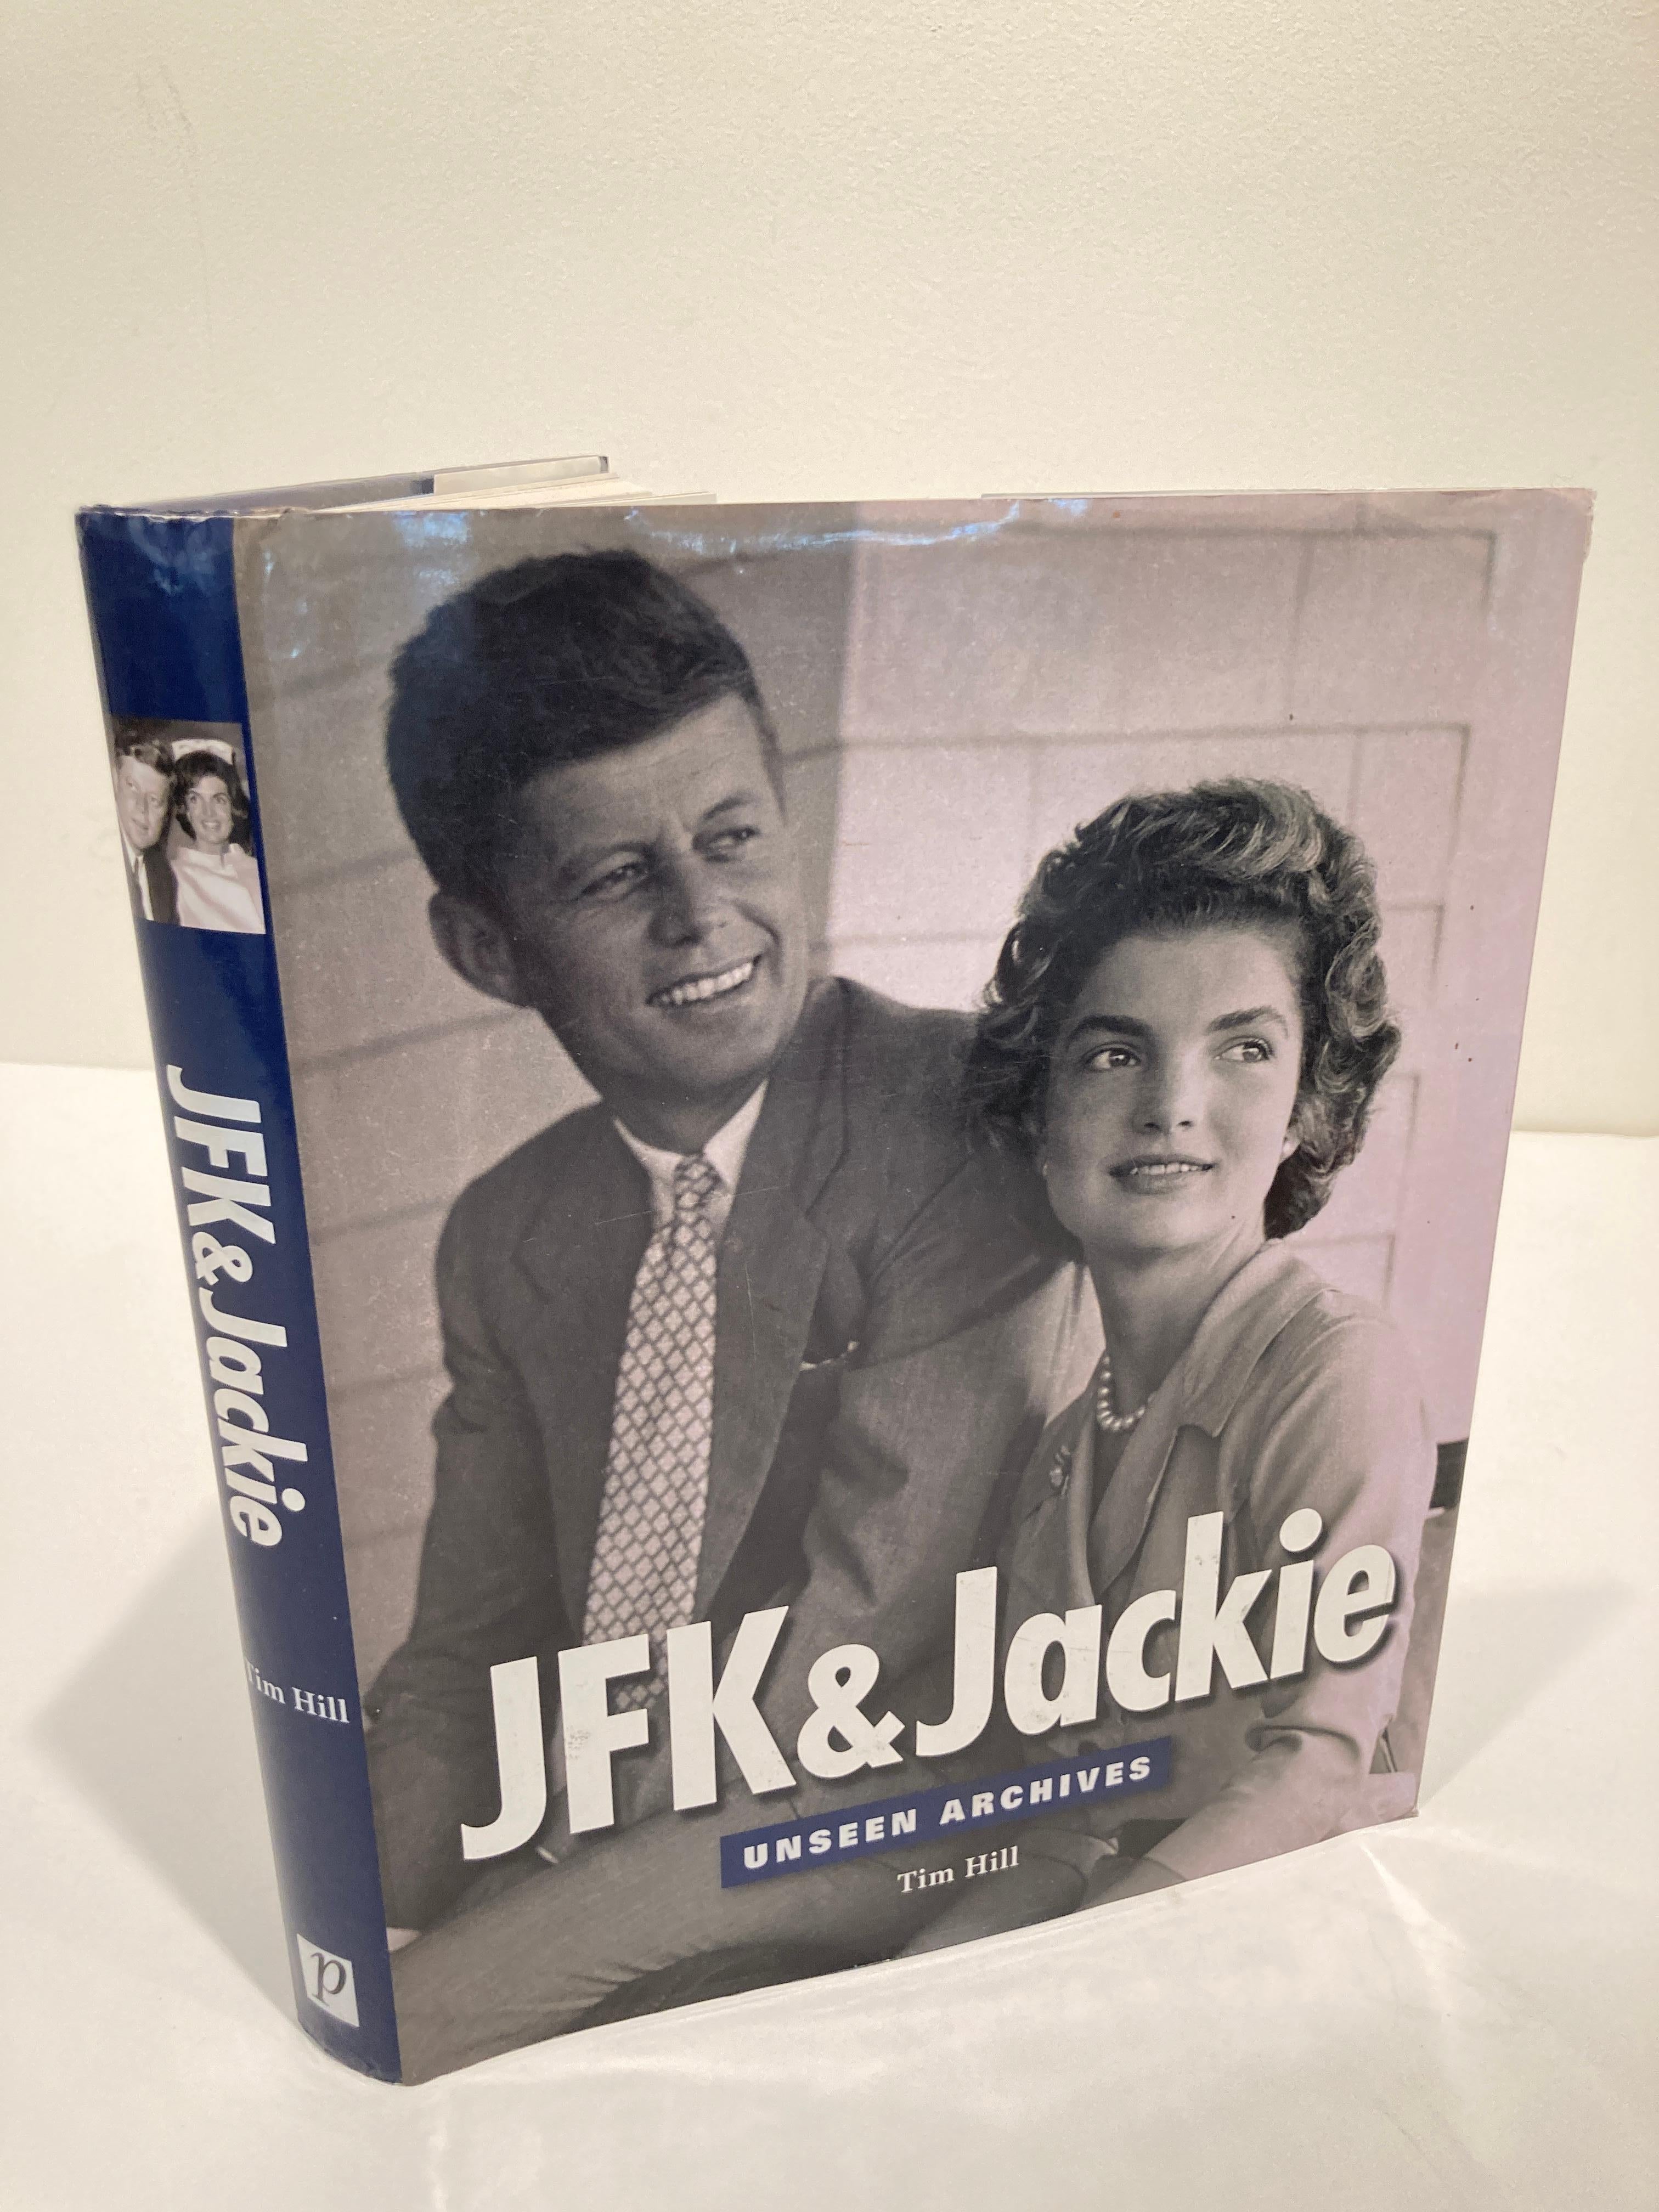 JFK & Jackie. Unseen Archives by Tim Hill.
London: Parragon, Incorporated, 2003. First edition; first printing. Hardcover.
JFK and Jackie: unseen archives charts the rise to power of a political giant. 
It also recounts the key moments in a